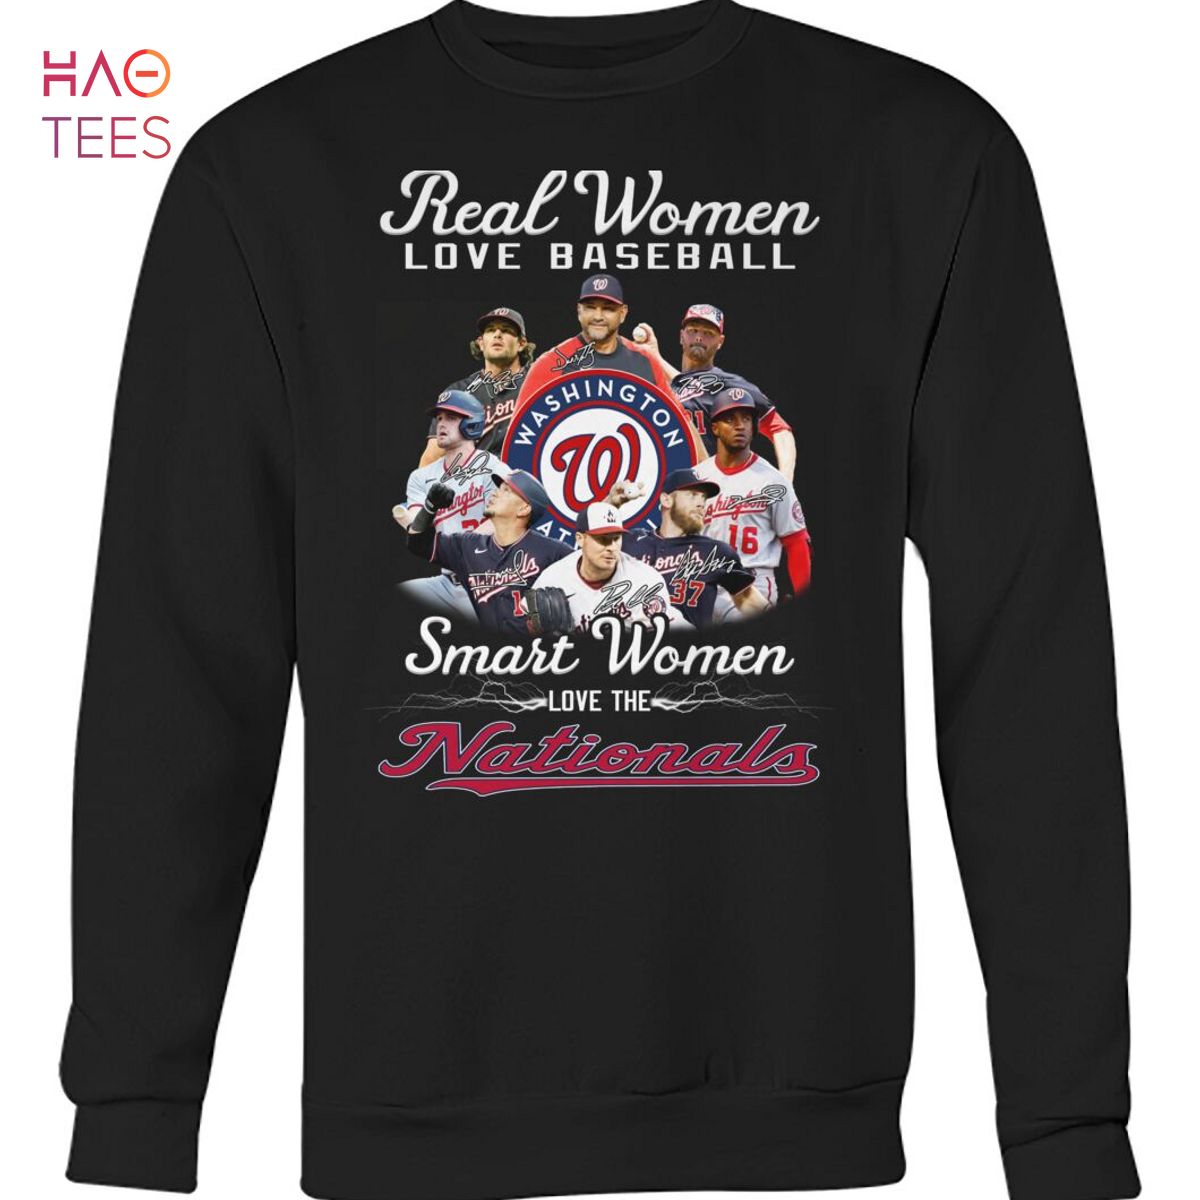 Real Women Love Baseball Smart Women Love The Rockies Signatures Shirt -  Bring Your Ideas, Thoughts And Imaginations Into Reality Today